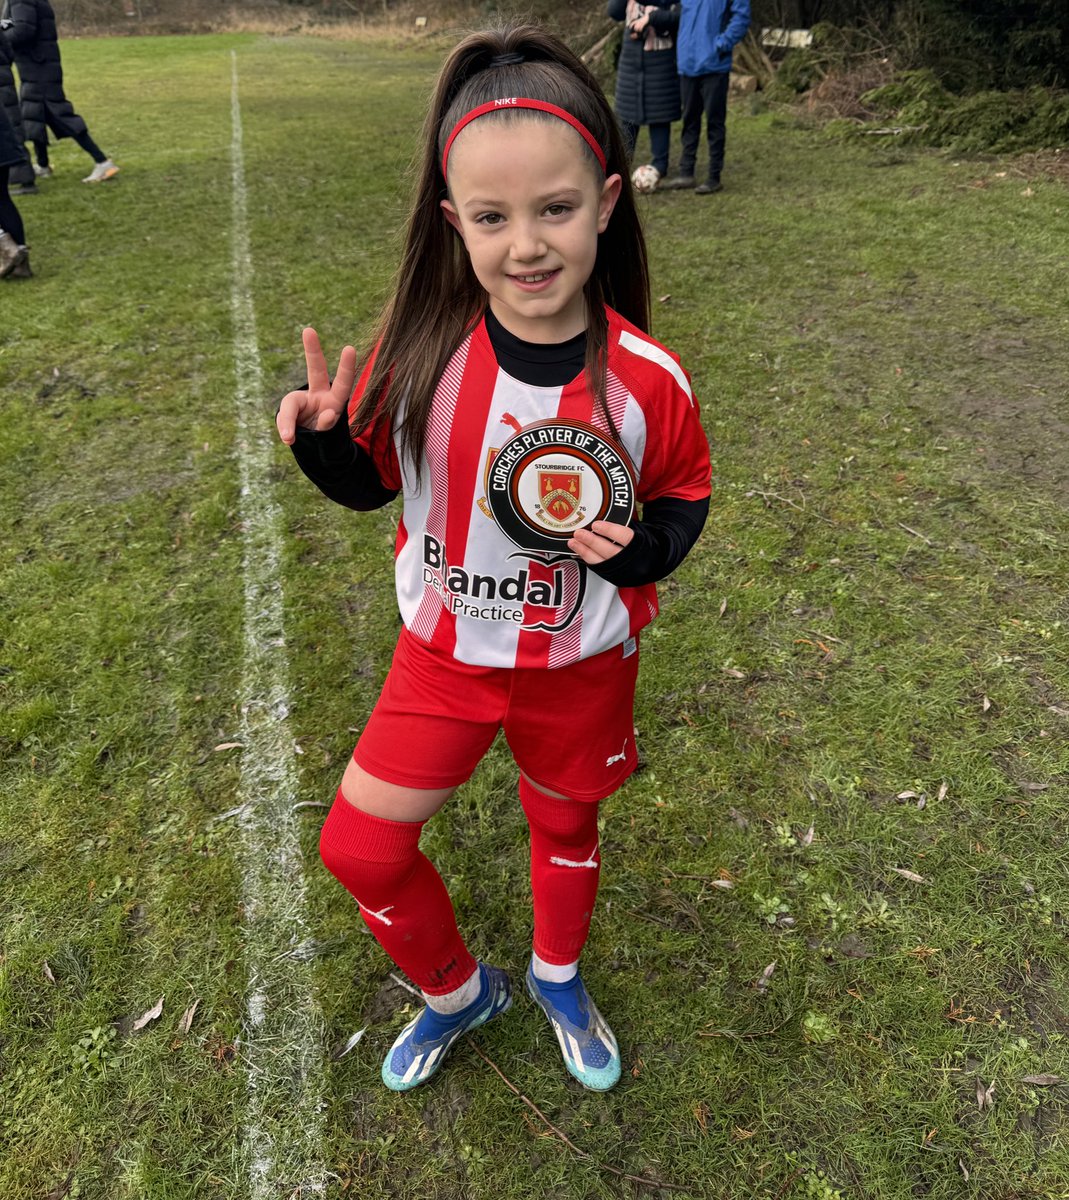 Player of the match for my girl! 💪🏻❤️
#GlassGirls